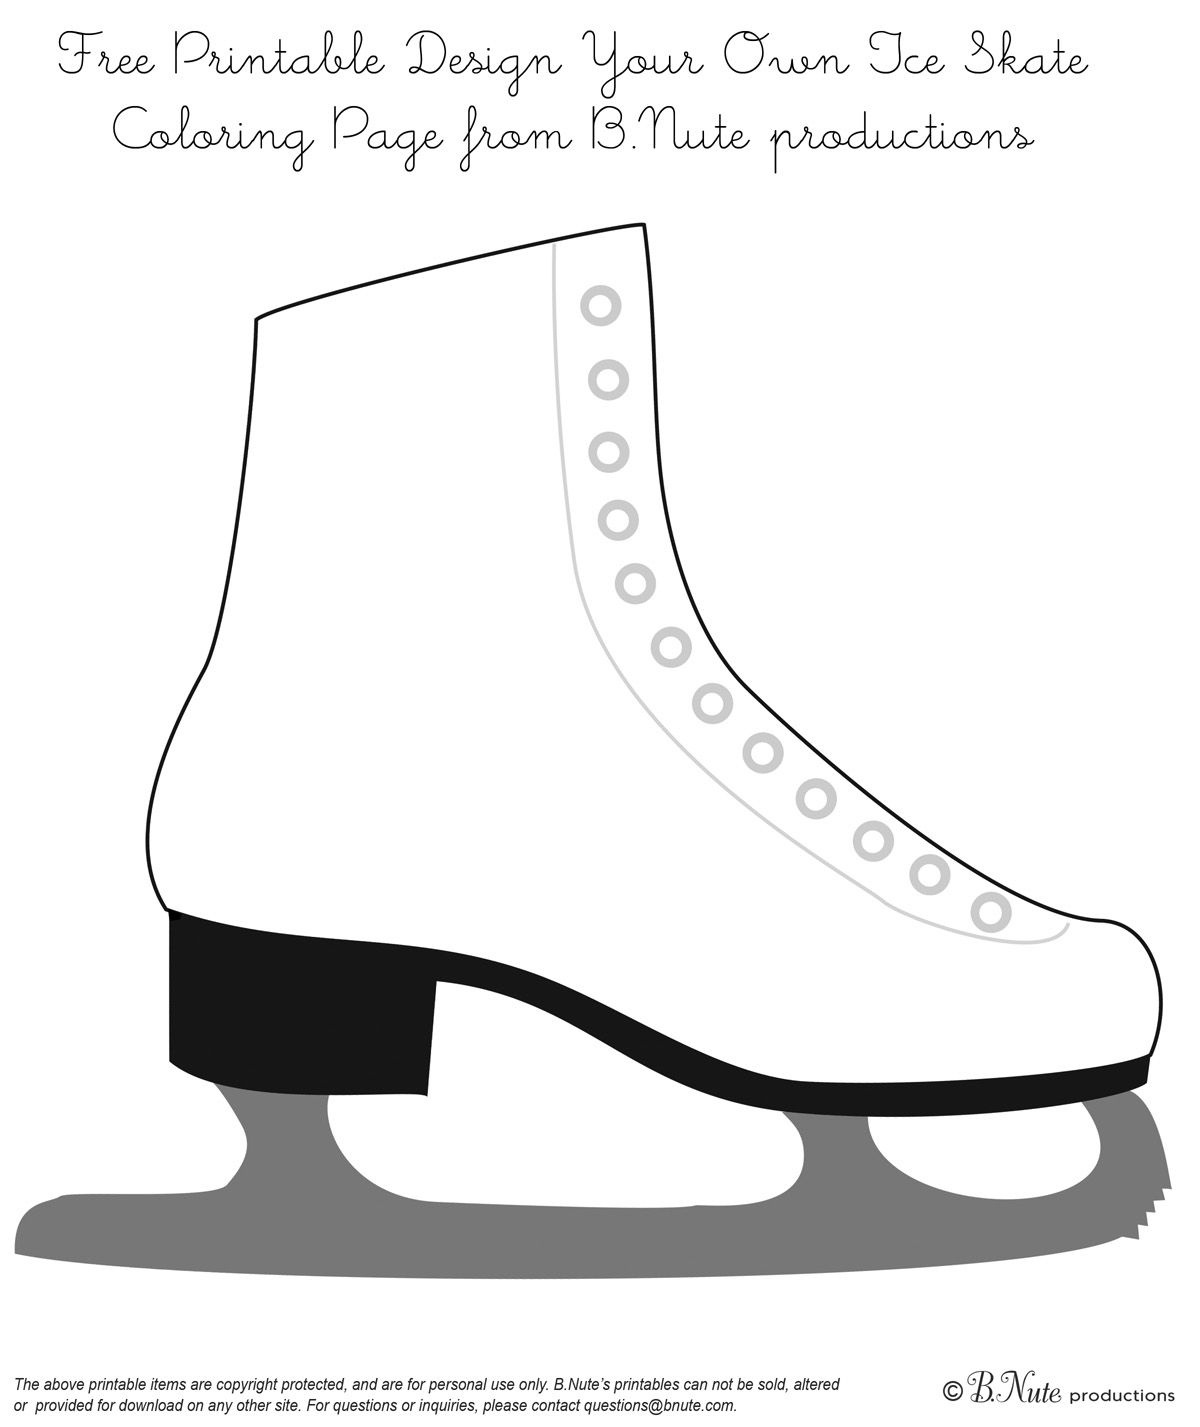 Bnute Productions: Free Printable Coloring Page: Design Your Own Ice - Free Printable Skateboard Birthday Party Invitations